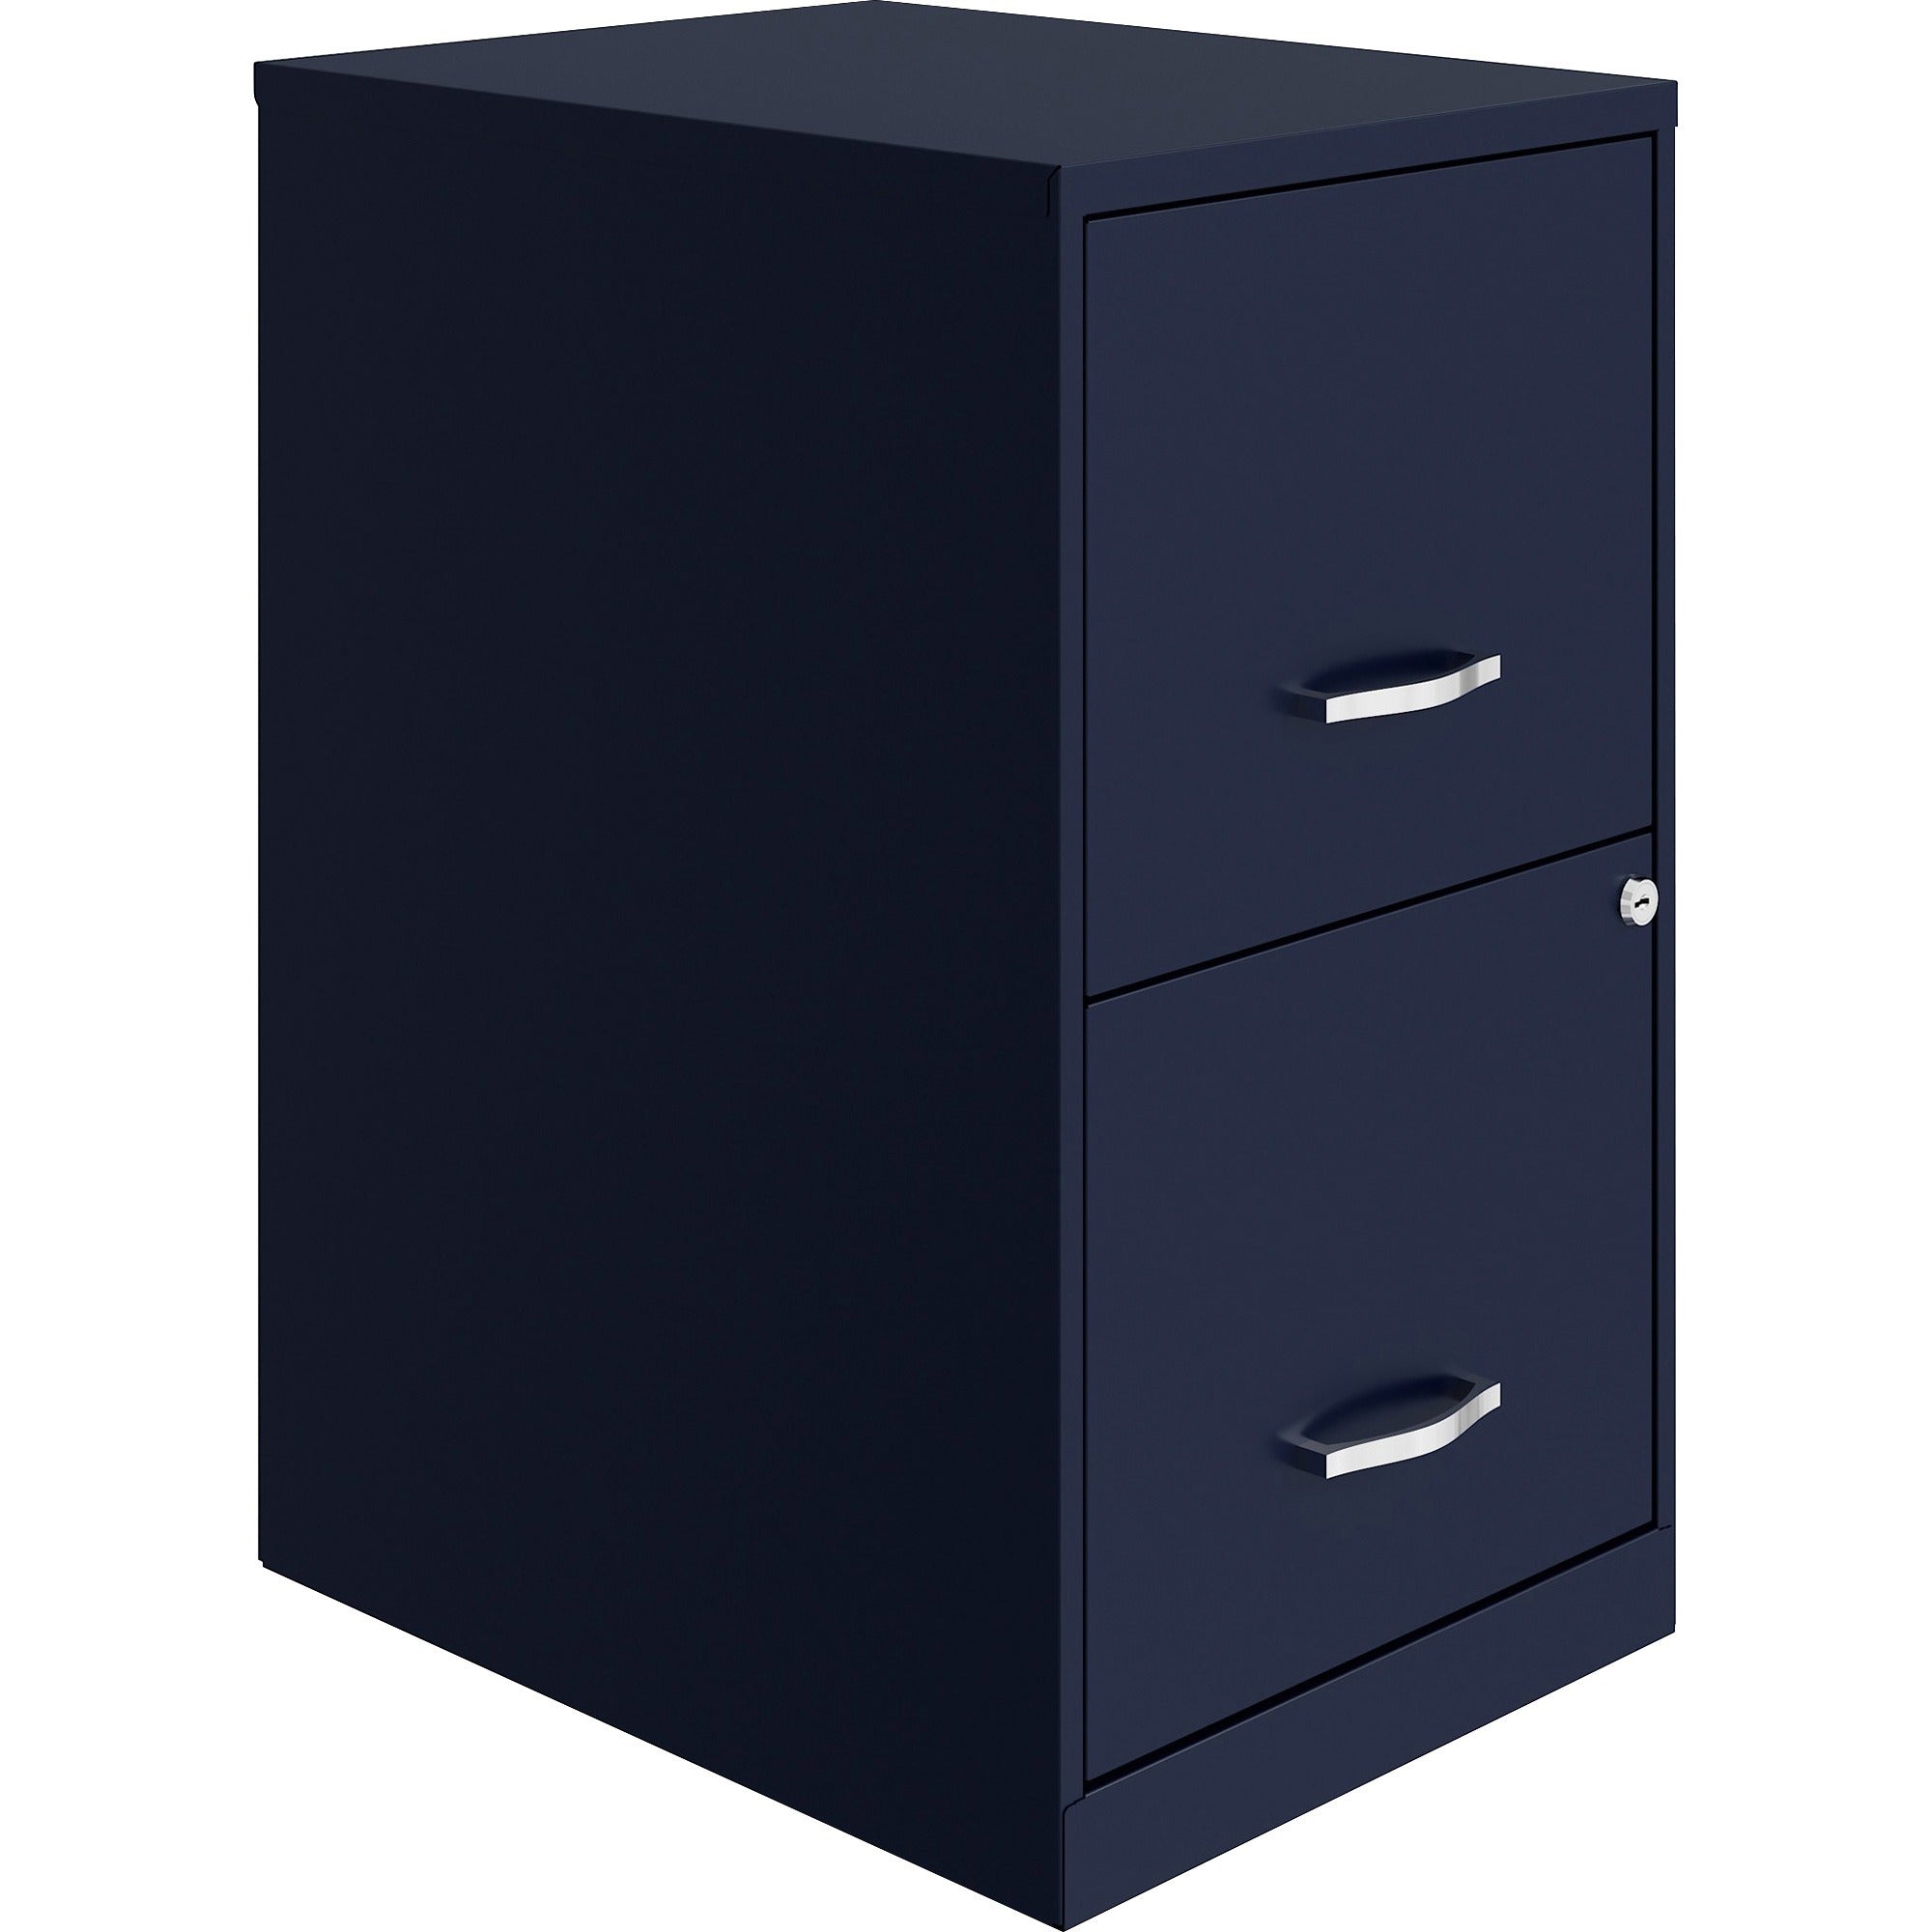 nusparc-file-cabinet-142-x-18-x-245-2-x-drawers-for-file-letter-vertical-locking-drawer-glide-suspension-nonporous-surface-blue-baked-enamel-steel-recycled_nprvf218aany - 1